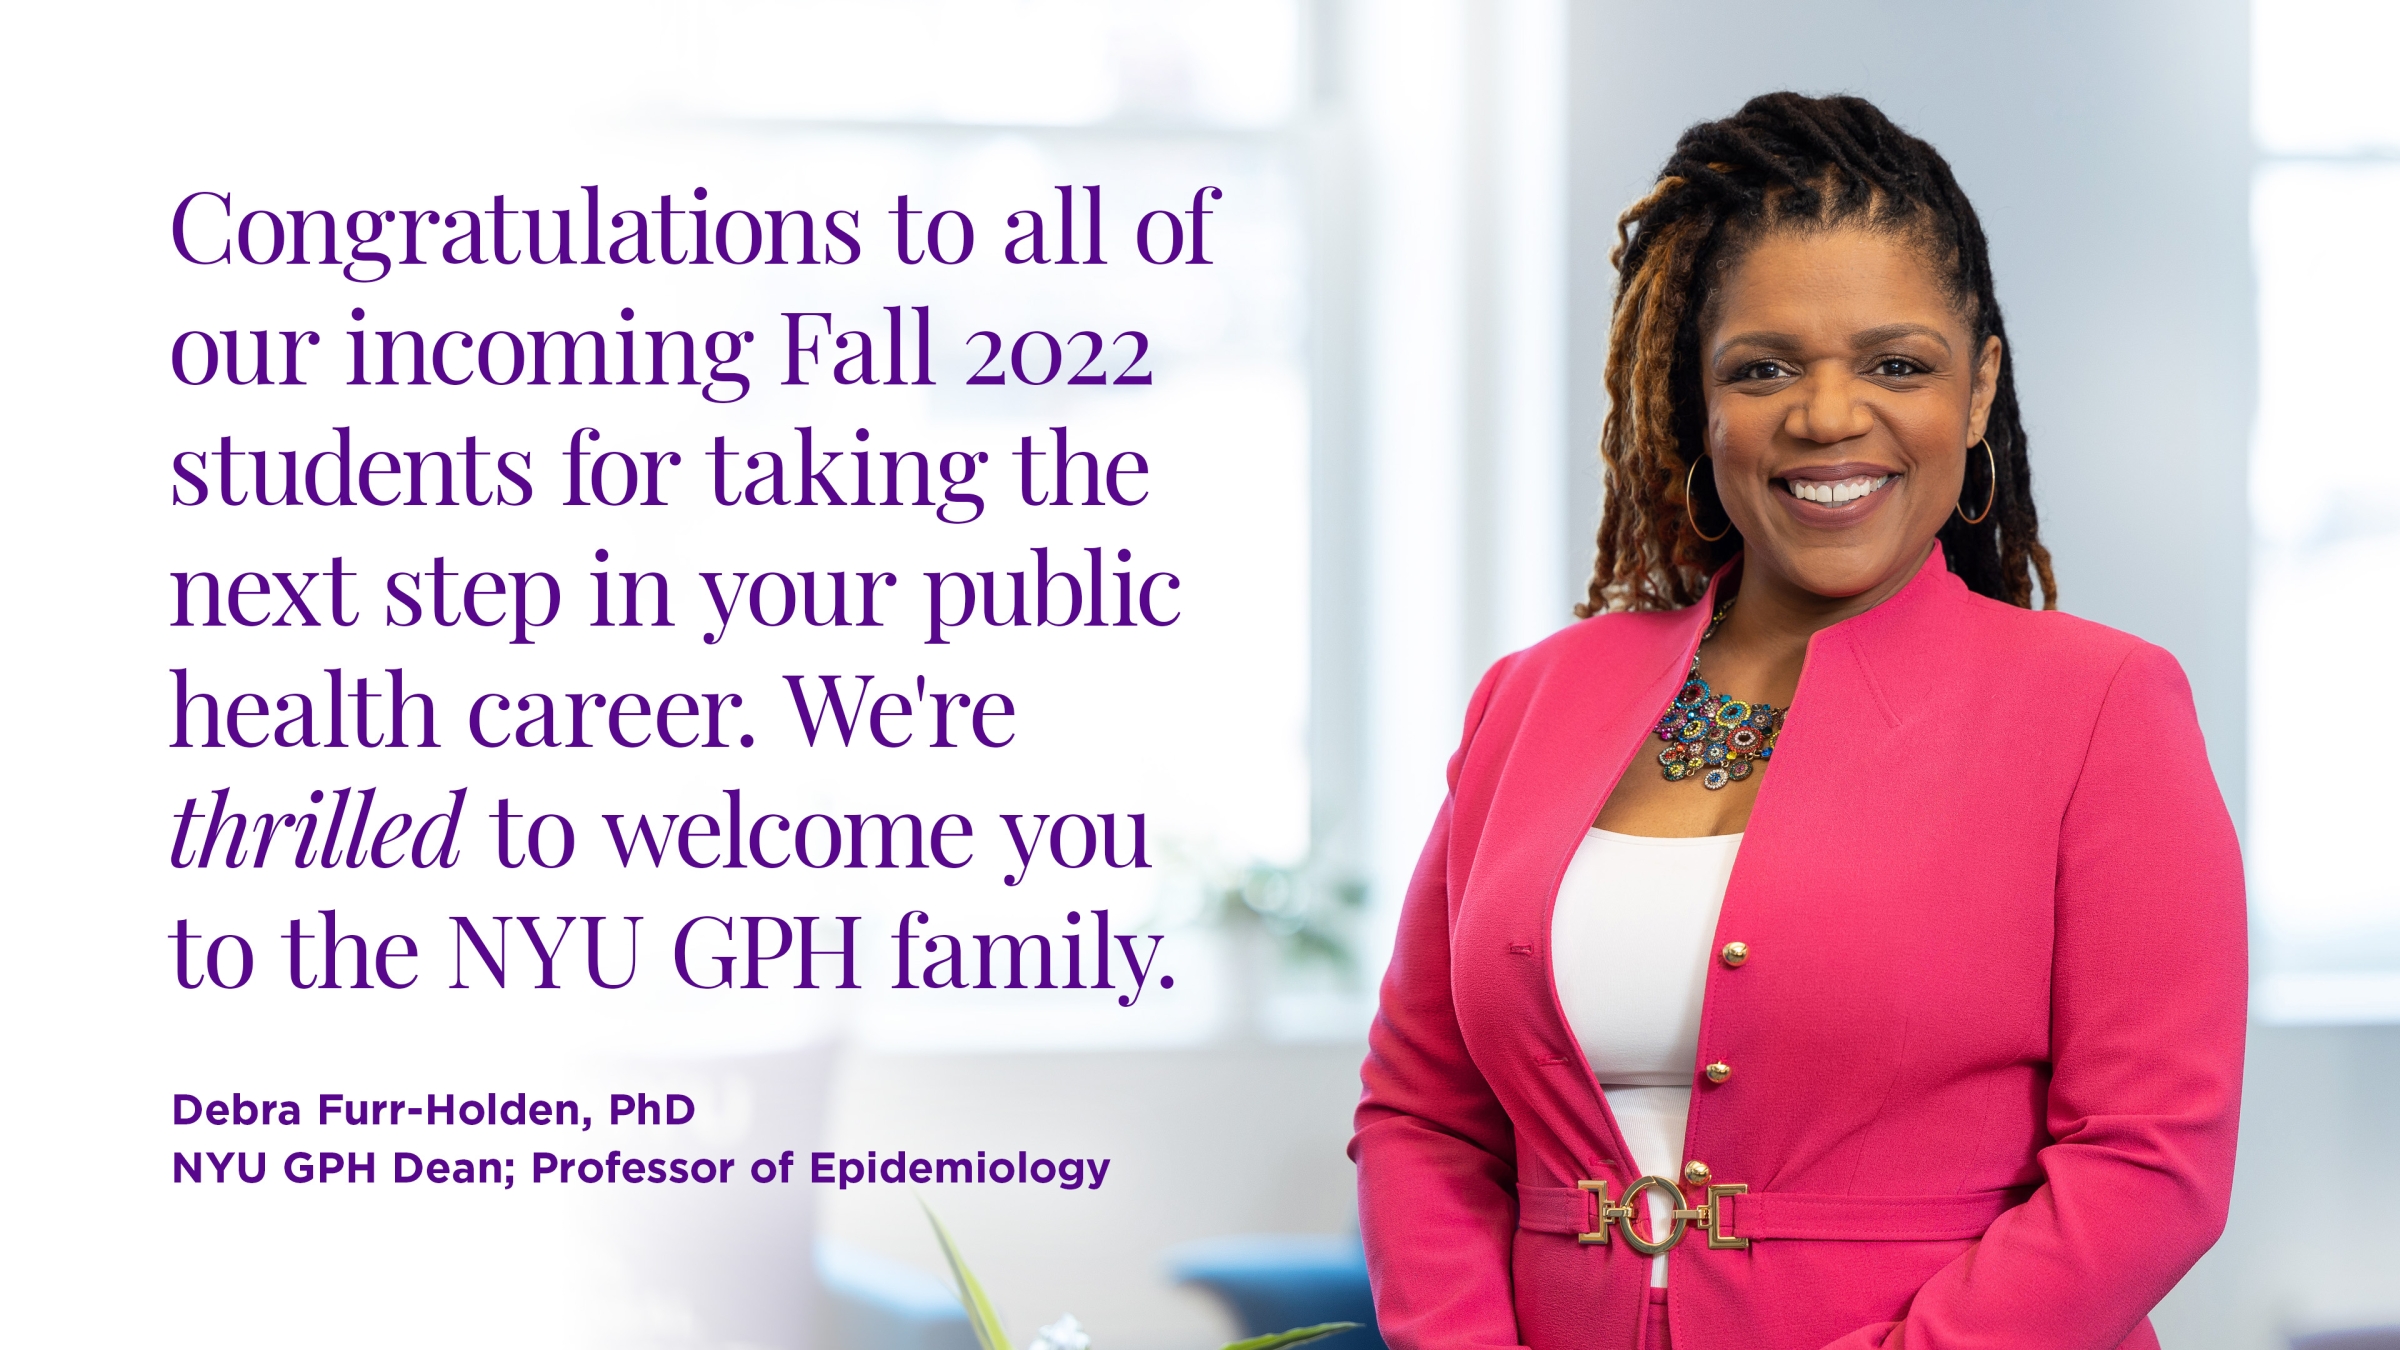 Congratulations to all of our incoming Fall 2022 students for taking the next step in your public health career. We're thrilled to welcome you to the NYU GPH family.